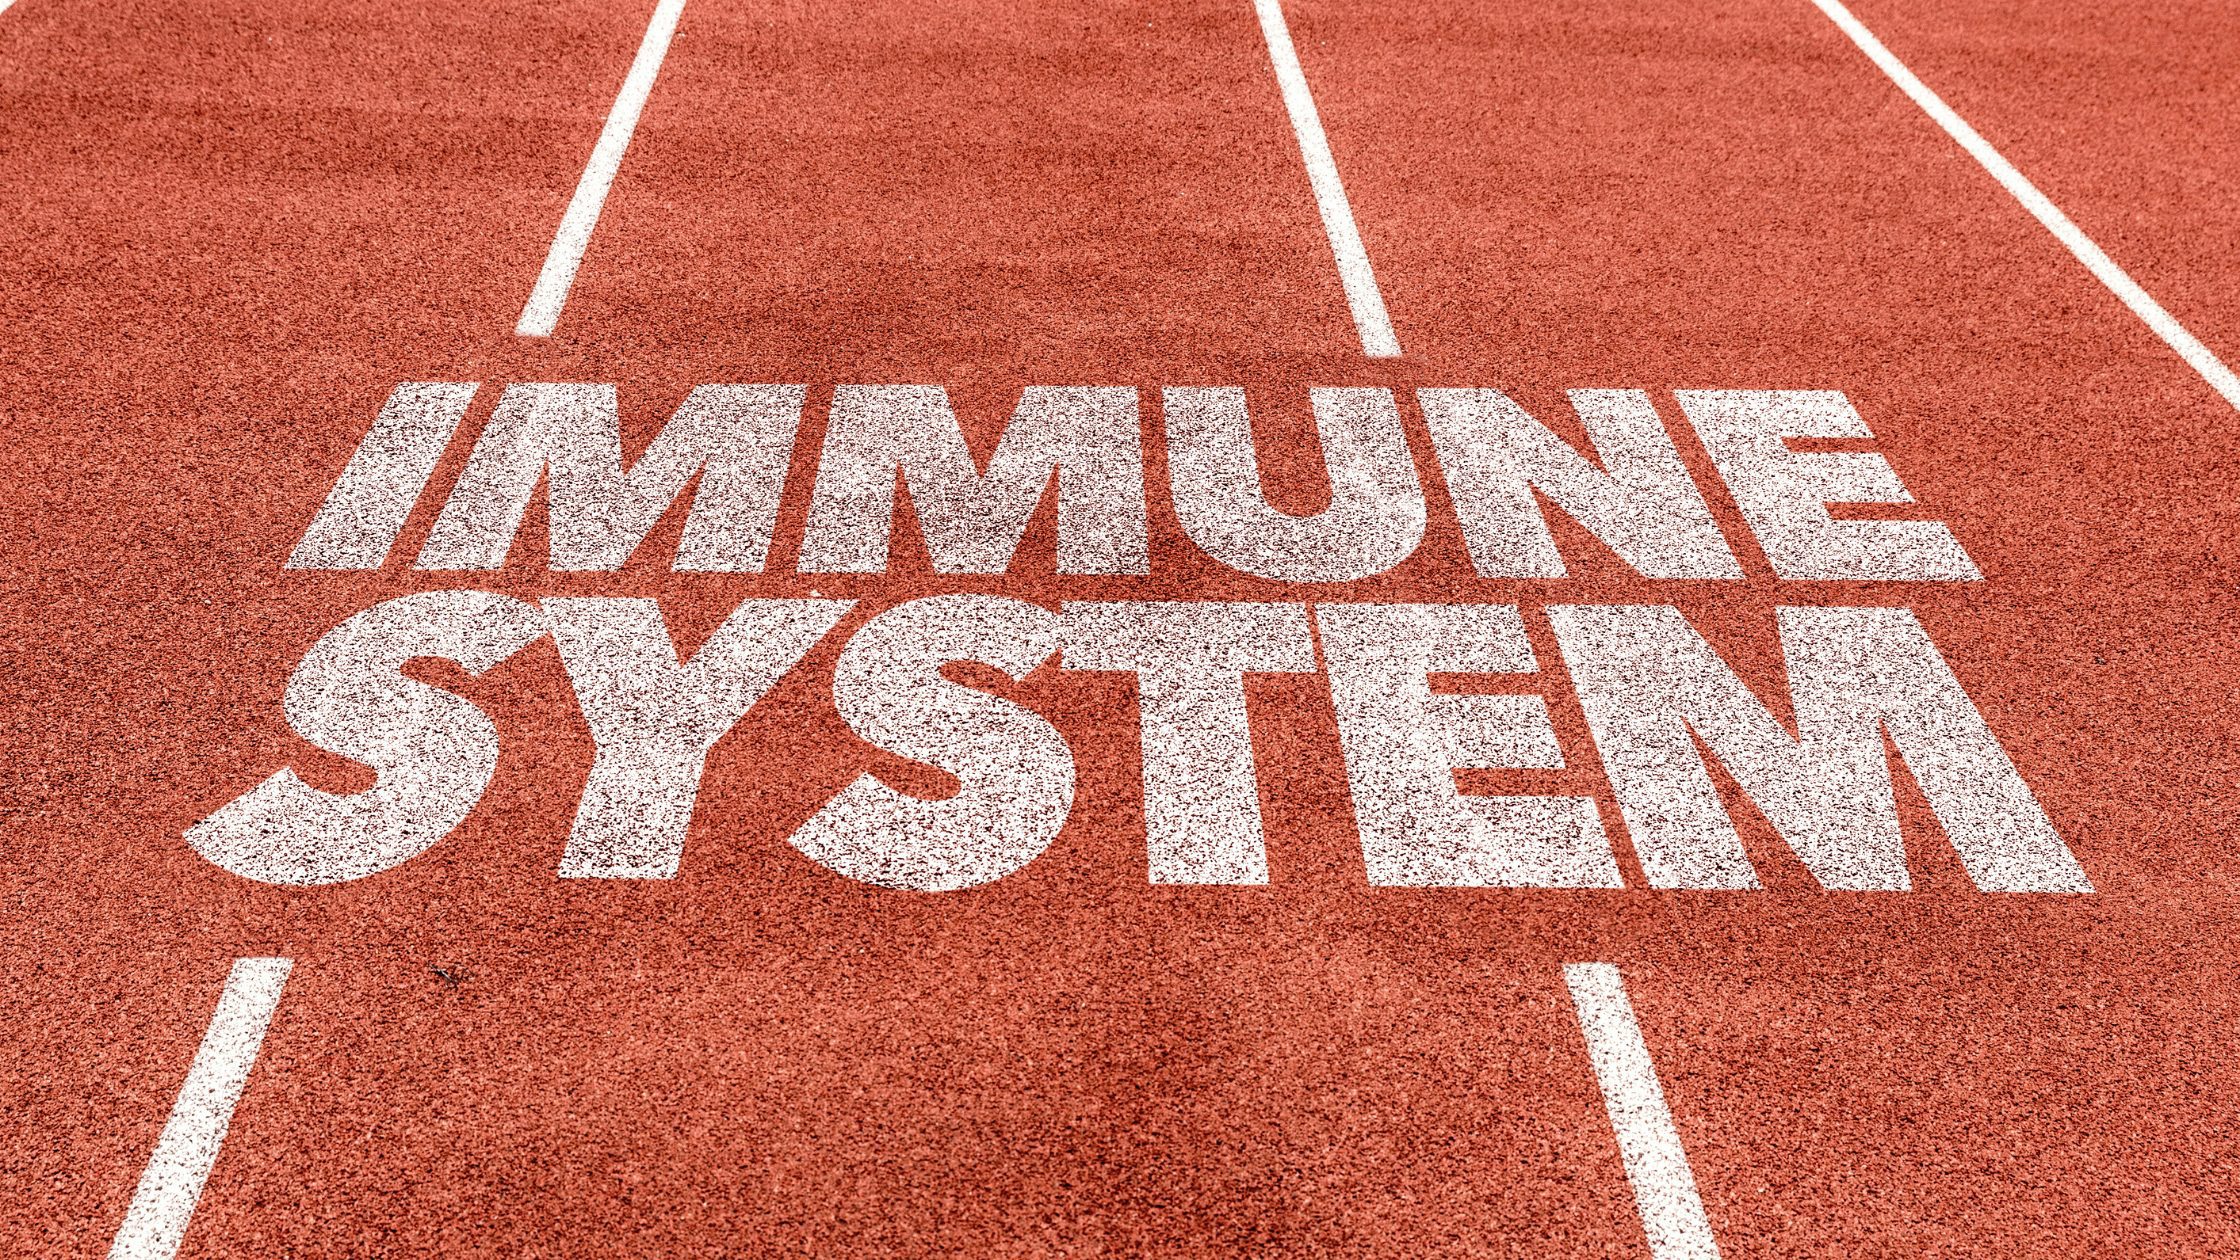 Immune System words on a track & field track